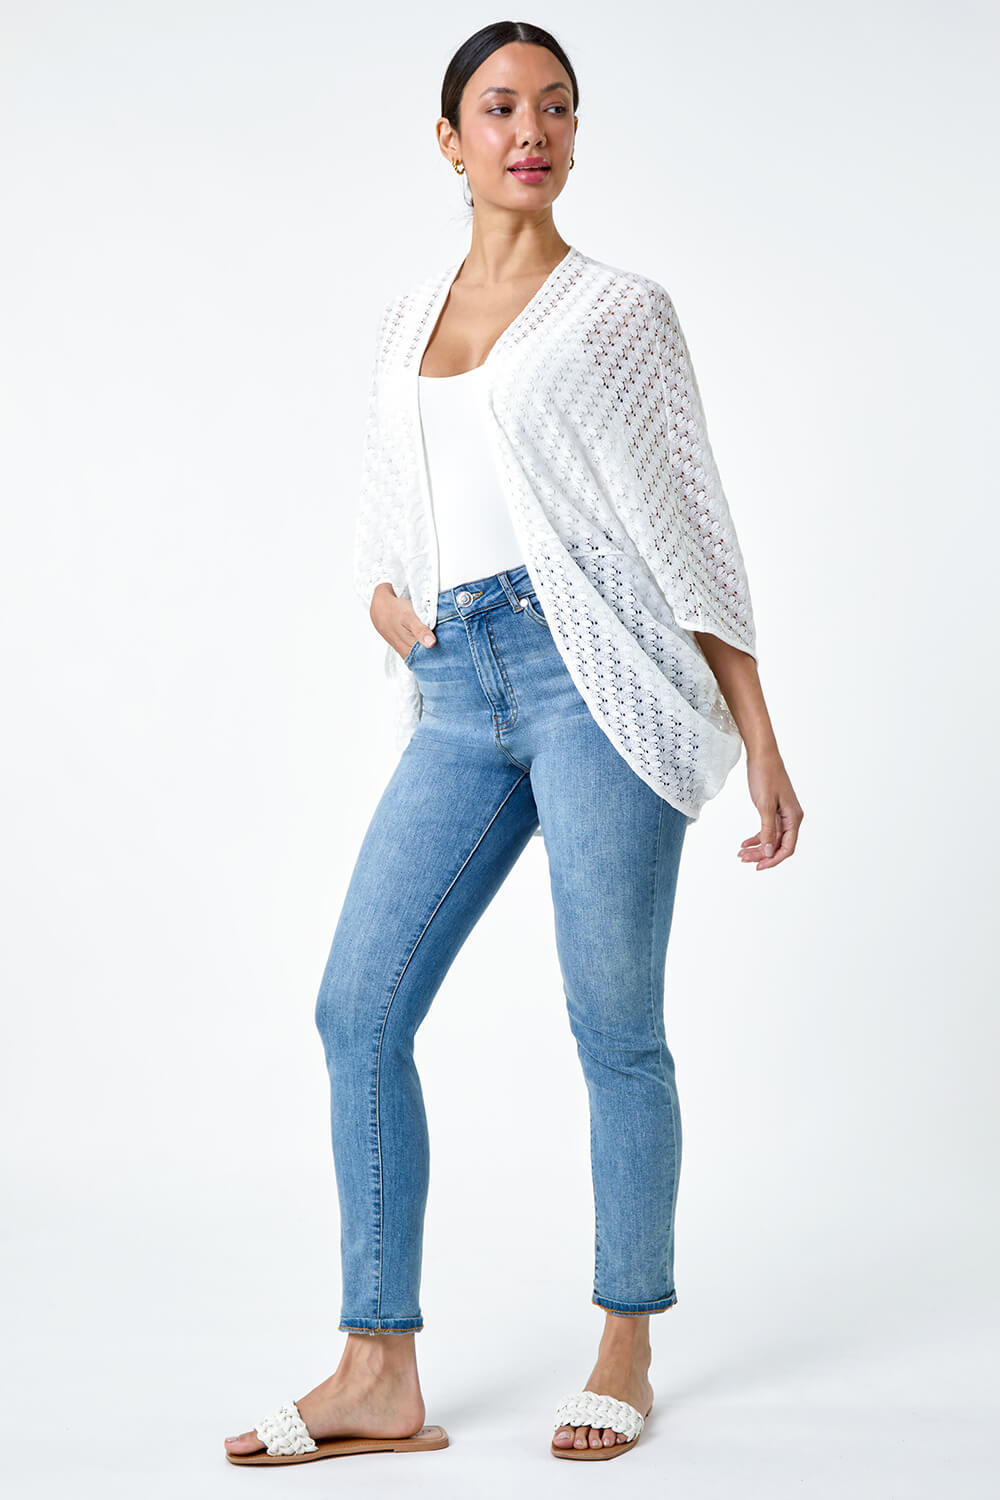 White Textured Knit Cardigan Cover Up, Image 4 of 5